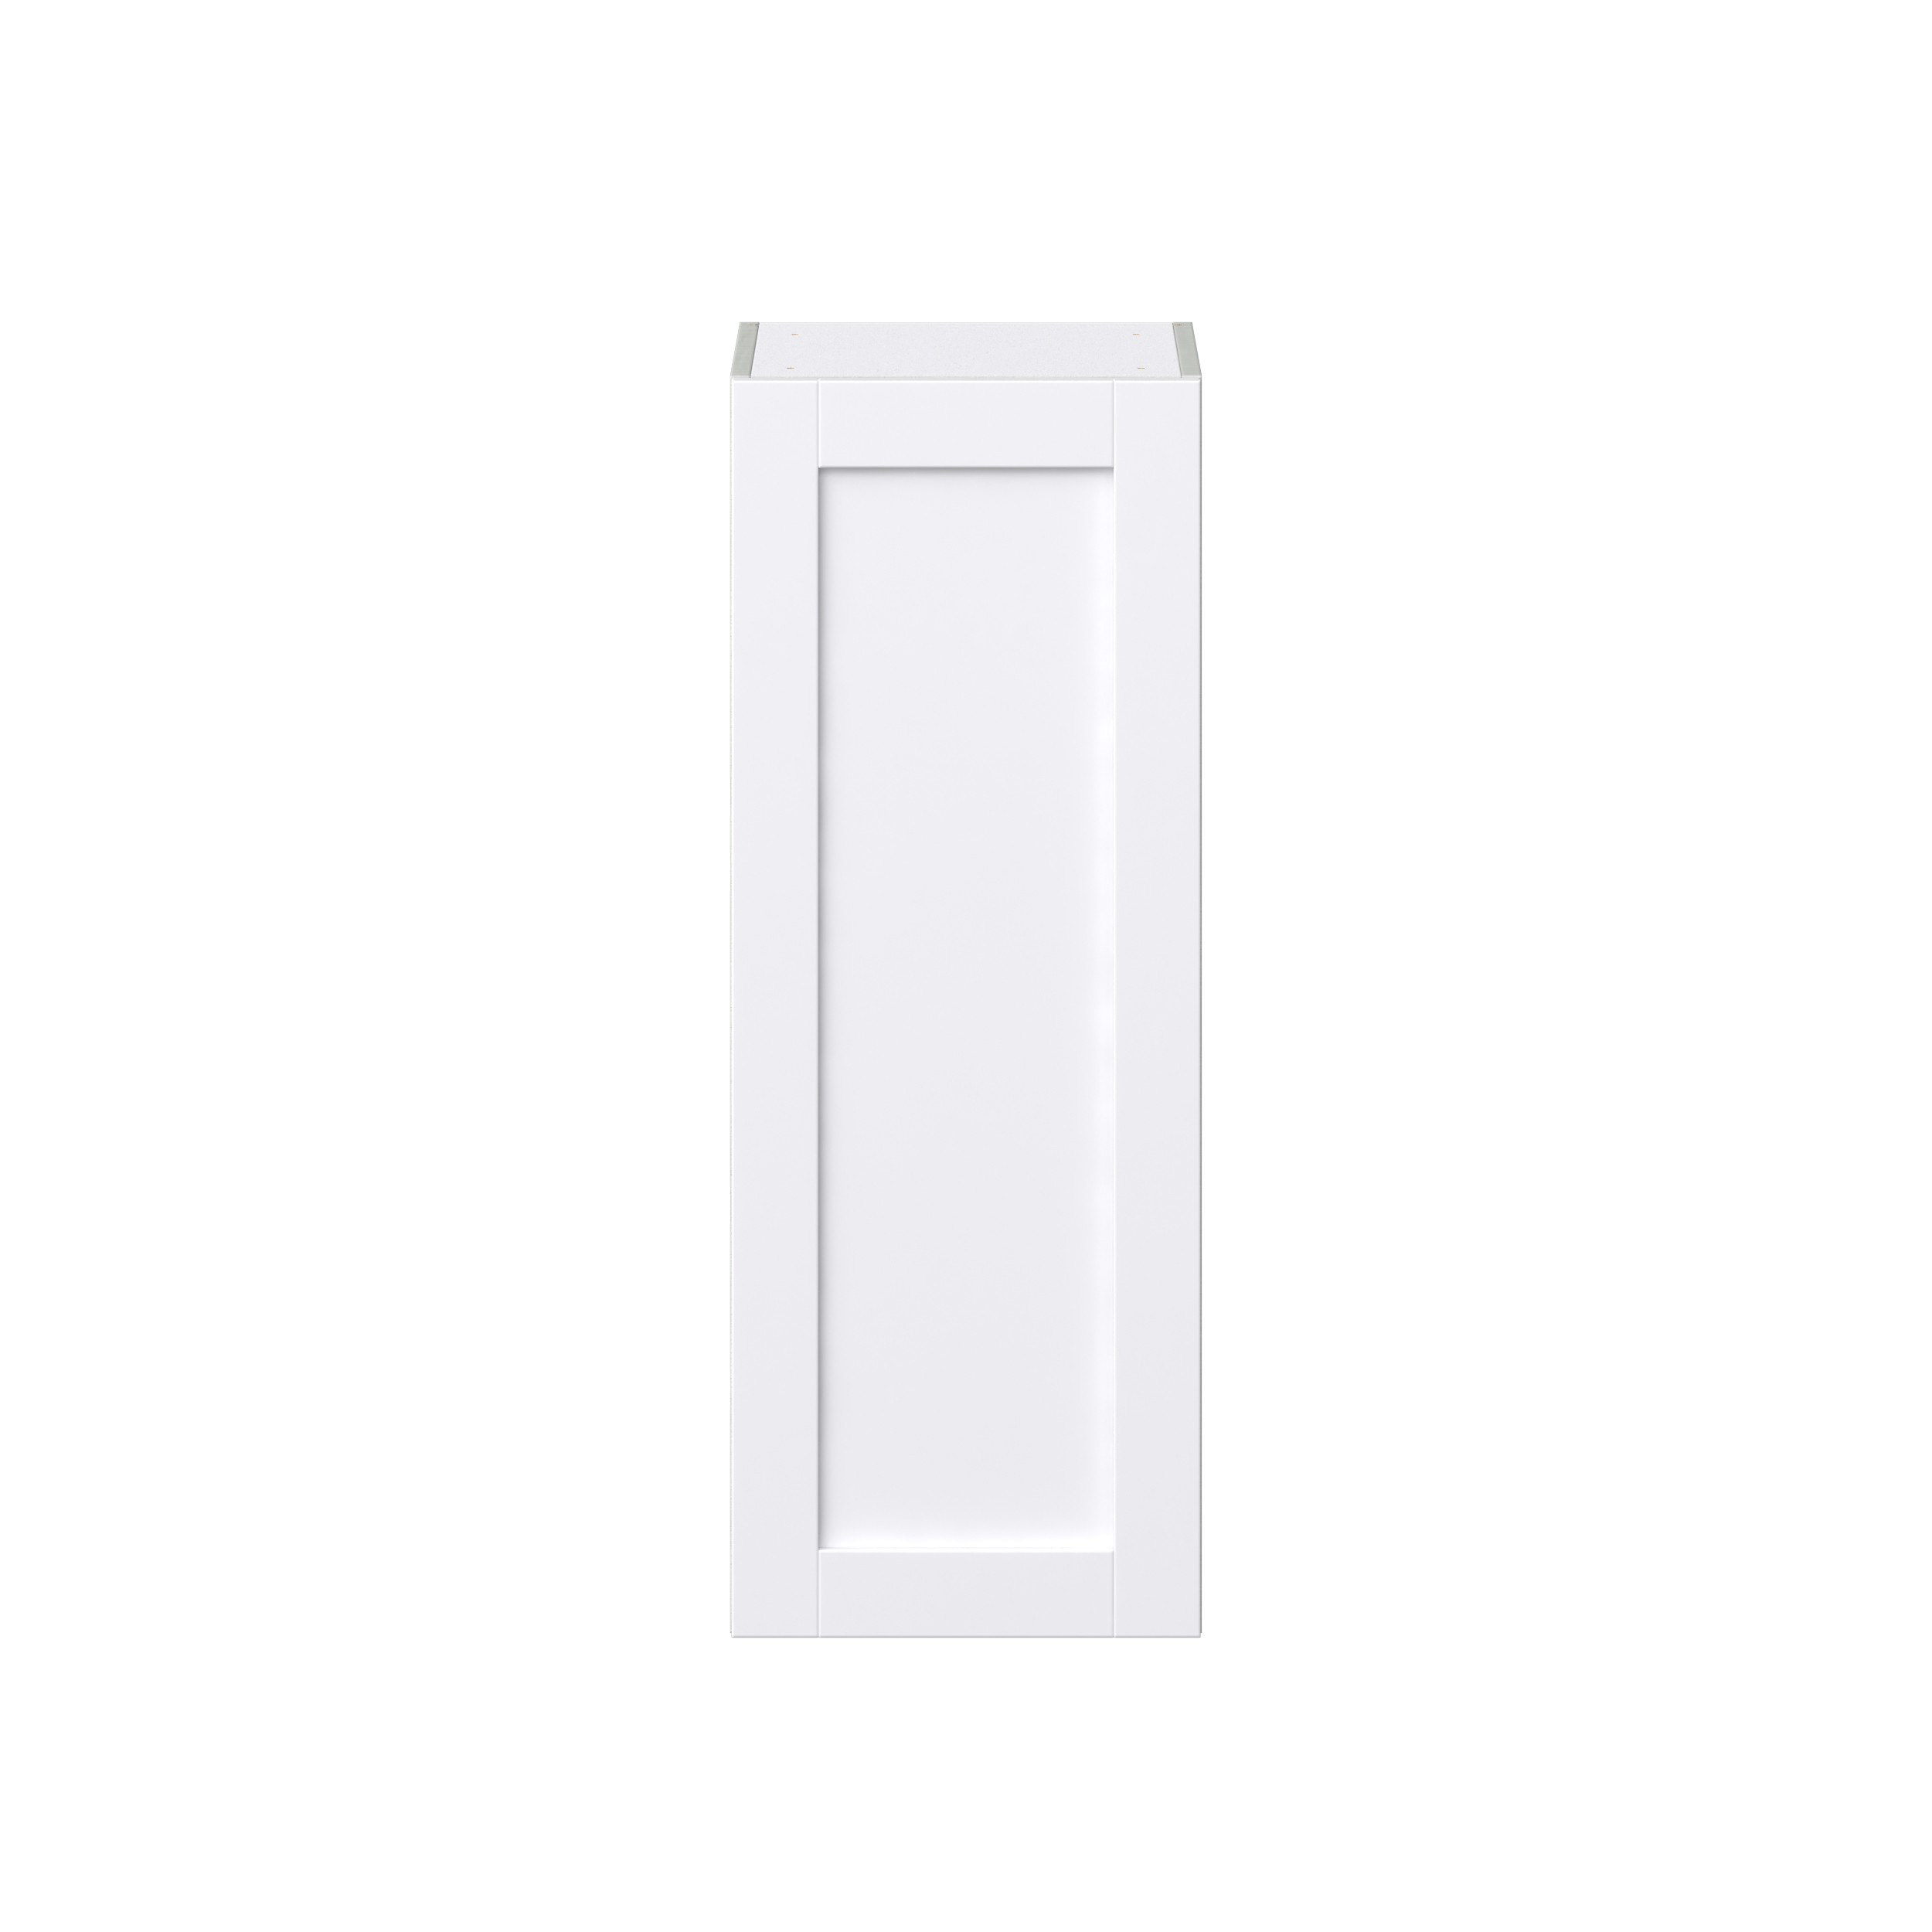 Dahlia Bright White Shaker Assembled Wall Cabinet with Full High Door (15 in. W x 40 in. H x 14 in. D)